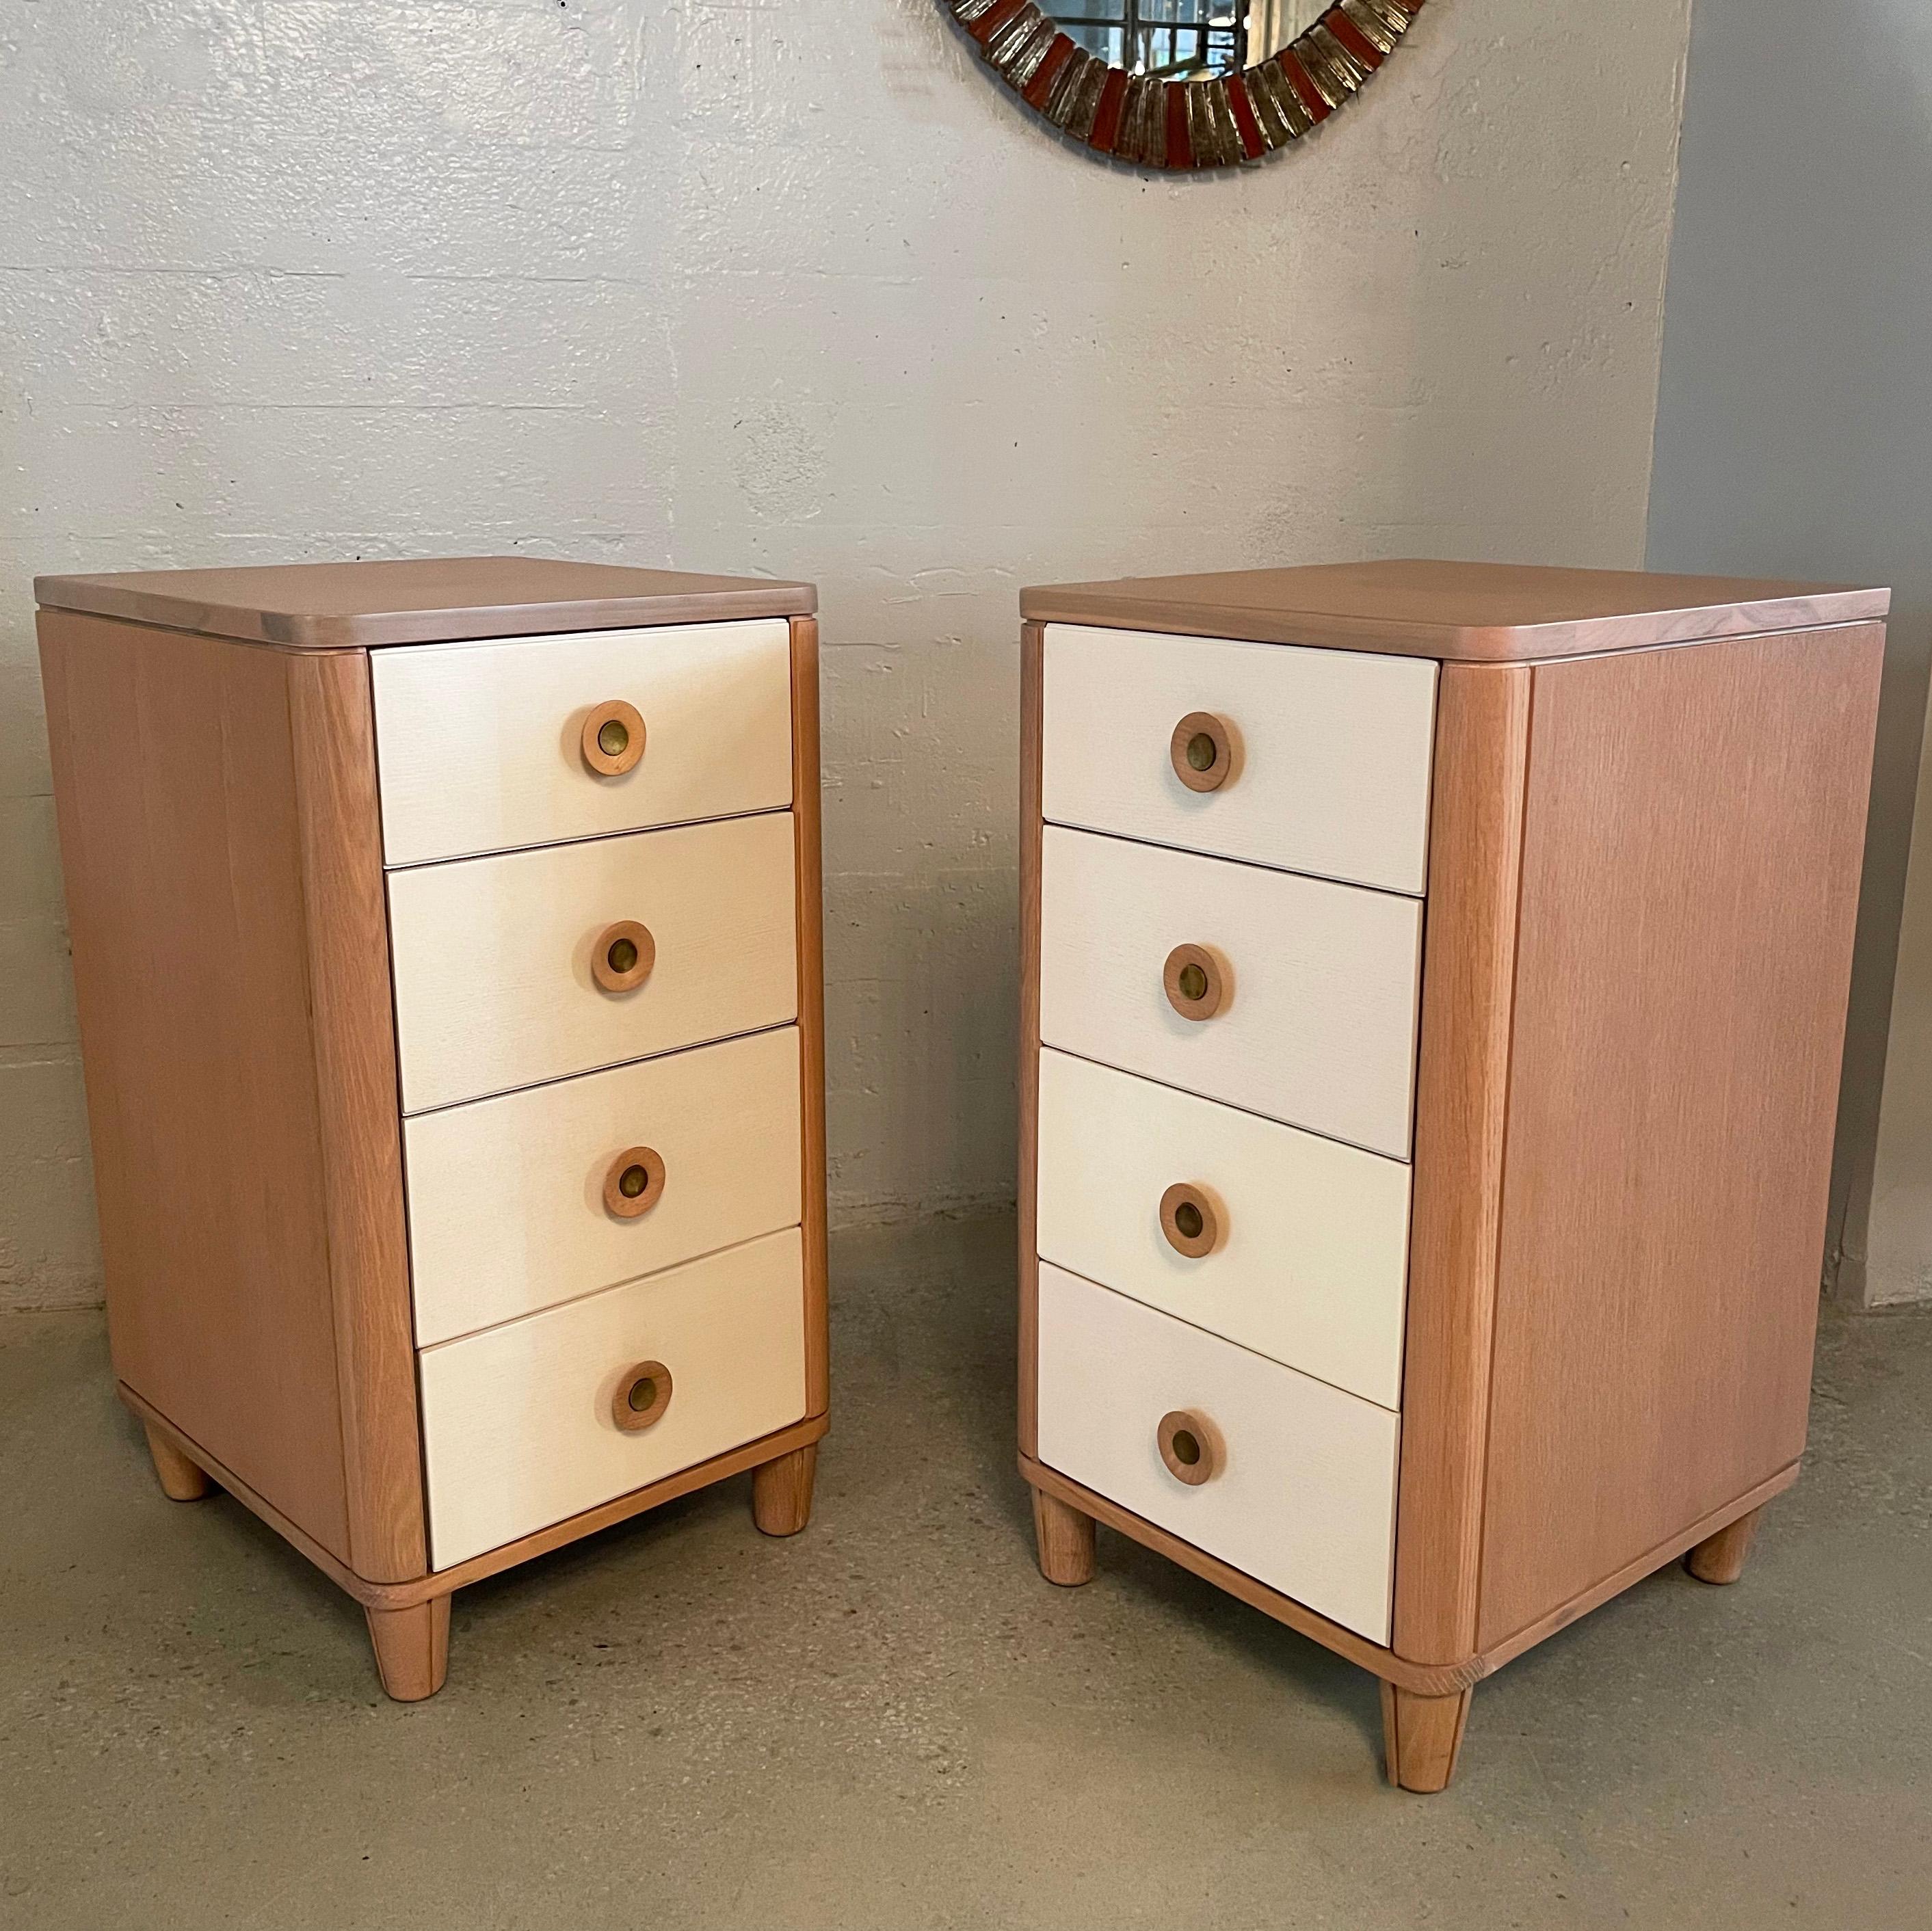 Pair of slim, highboy, 4 drawer pickled oak dressers by Raymond Loewy for Mengel feature a two-tone finish in blush pink with cream drawers. The drawers measure 14 W x 16 D x 6 H inches.